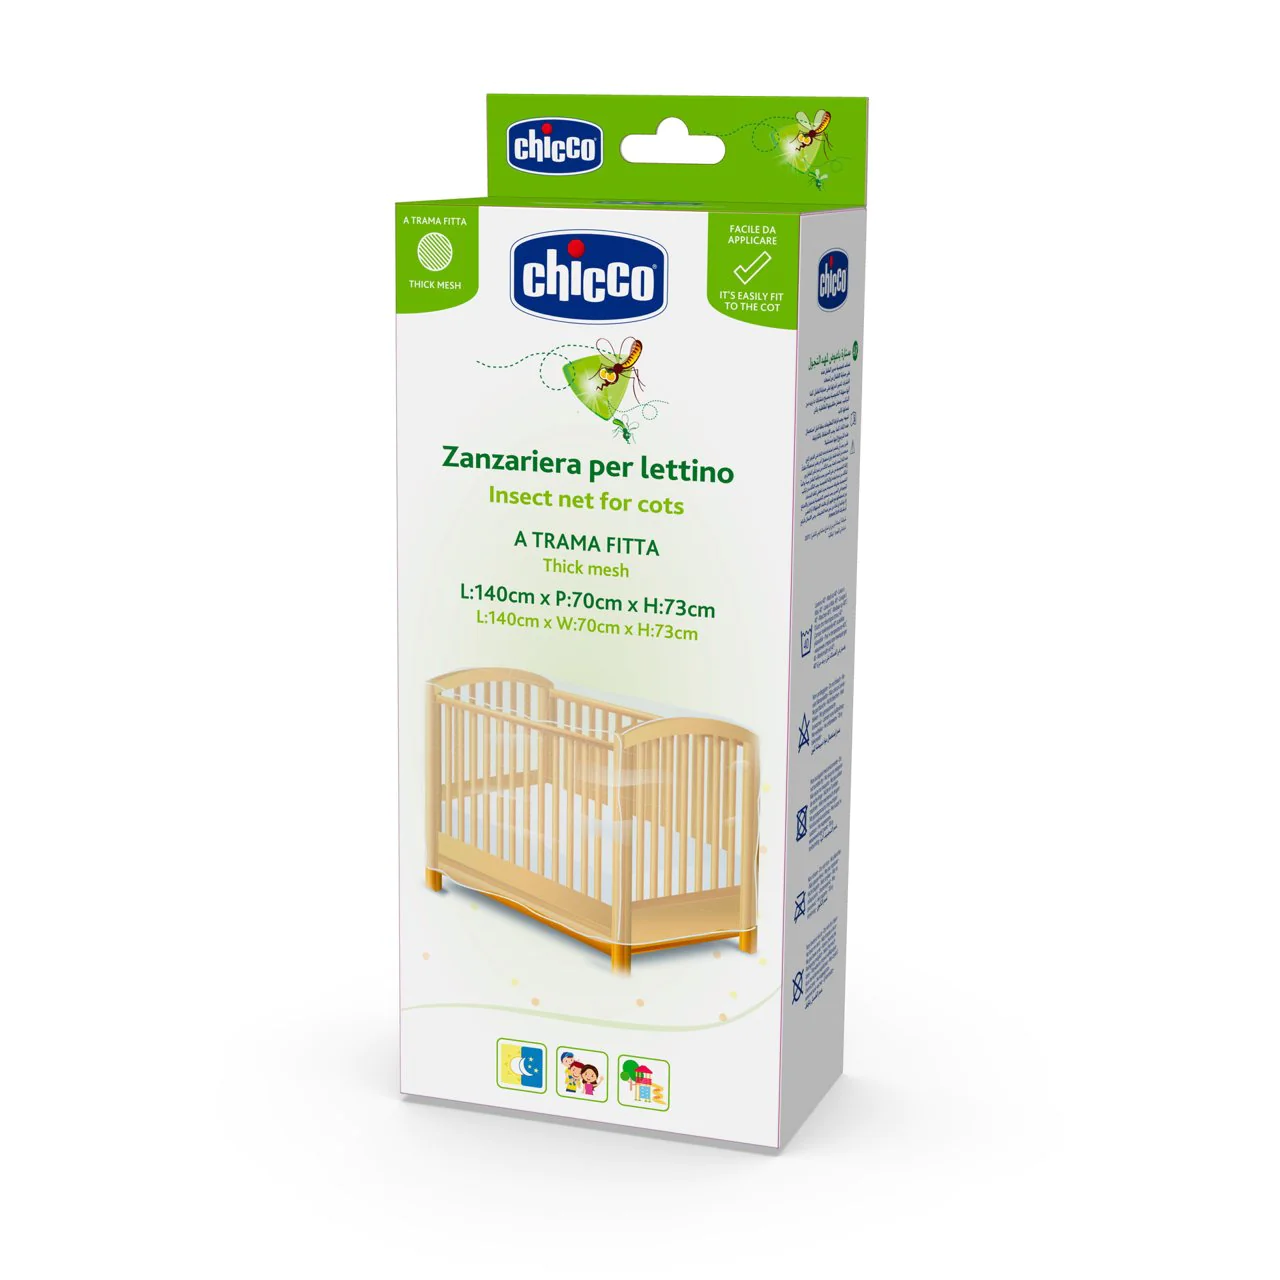 Chicco Cot Cradle swing 1pc 65984-30